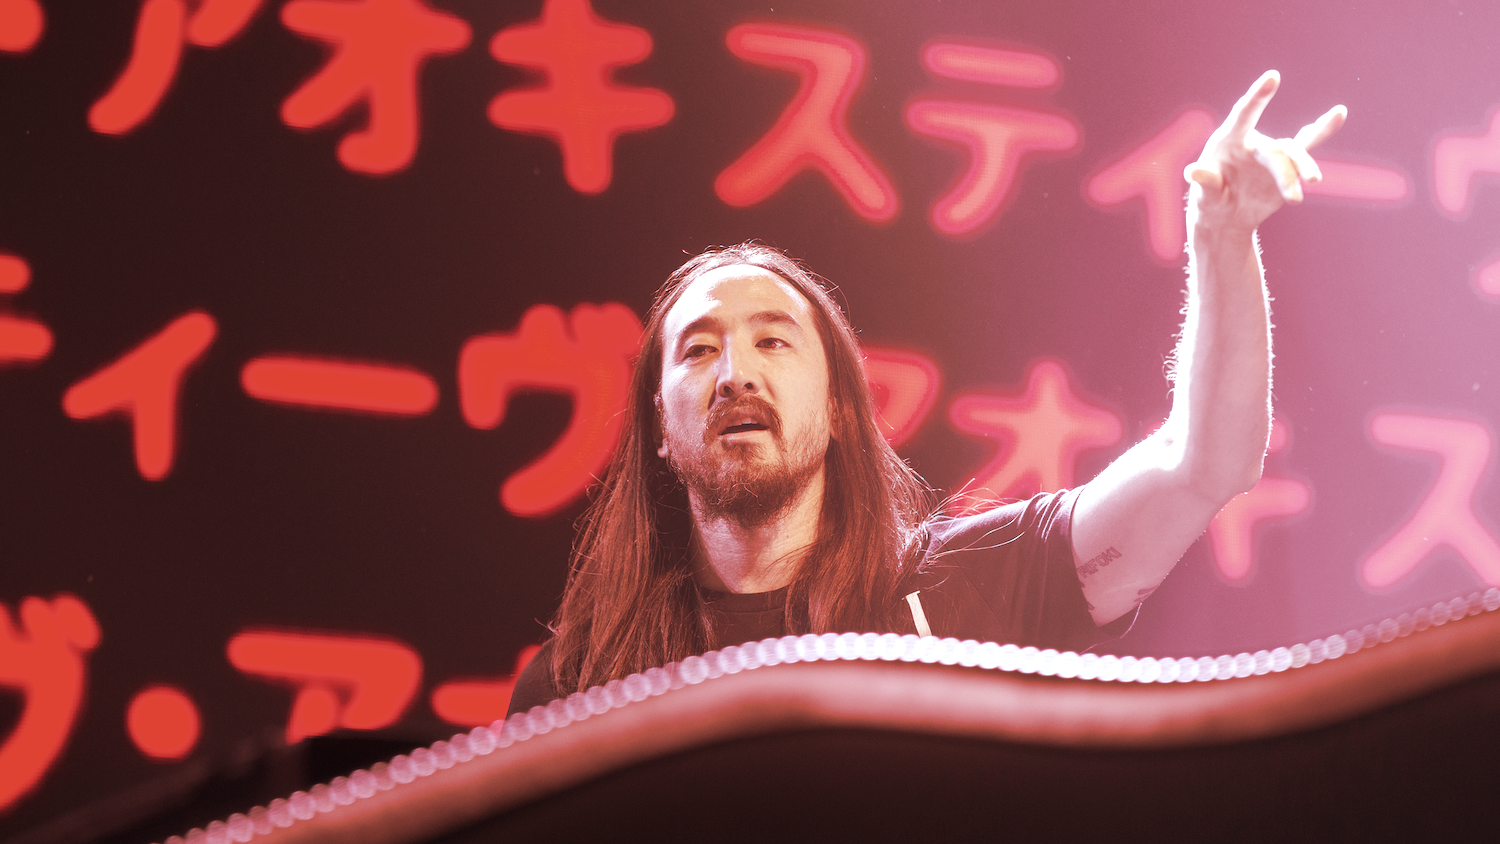 DJ Steve Aoki Brings Gold to One Piece with New Track - The Good Men Project